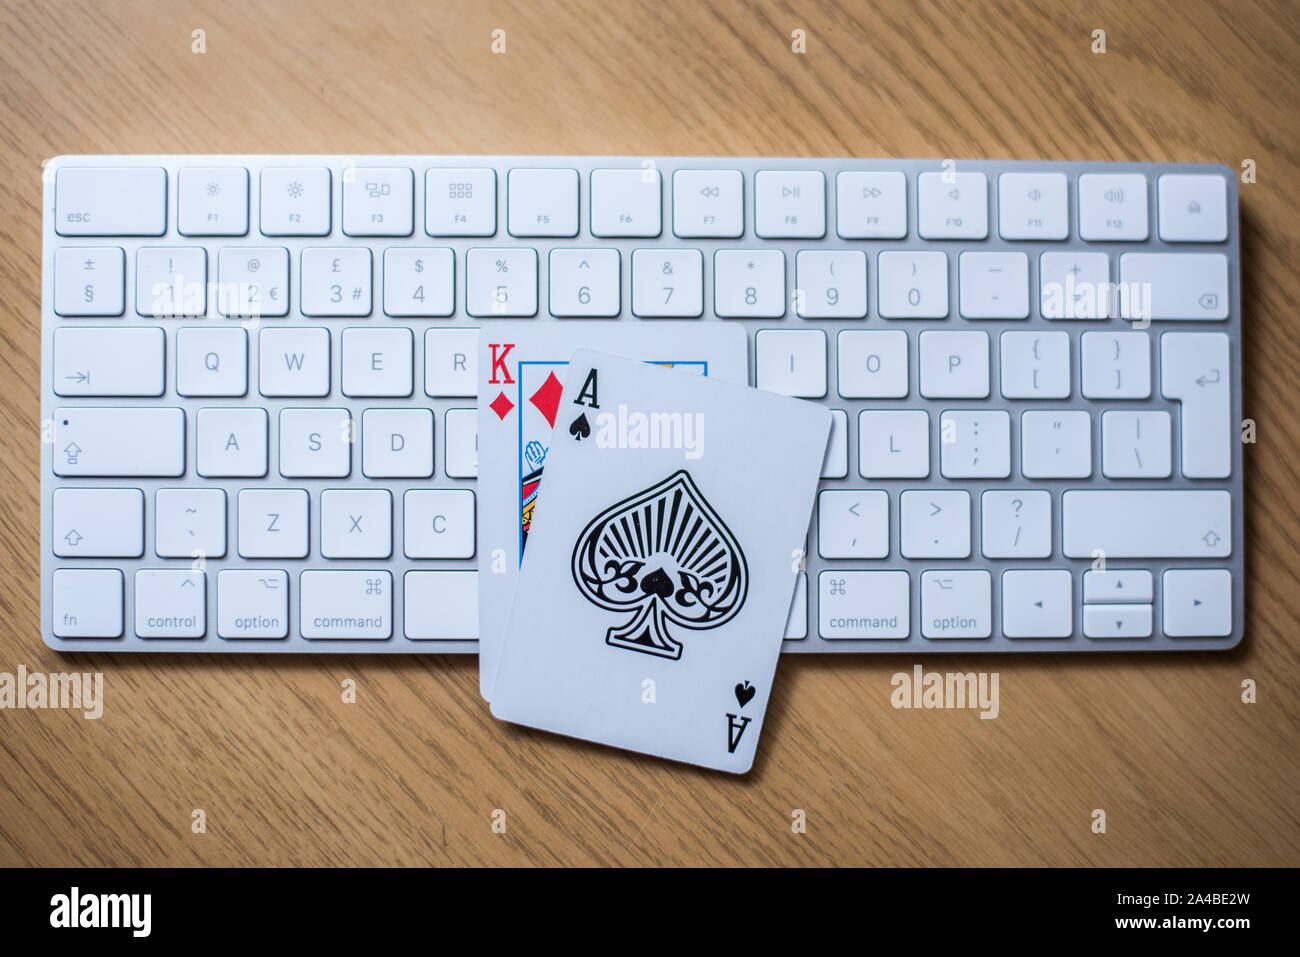 Online gambling and poker play concept with keyboard on a table showing king and ace cards Stock Photo